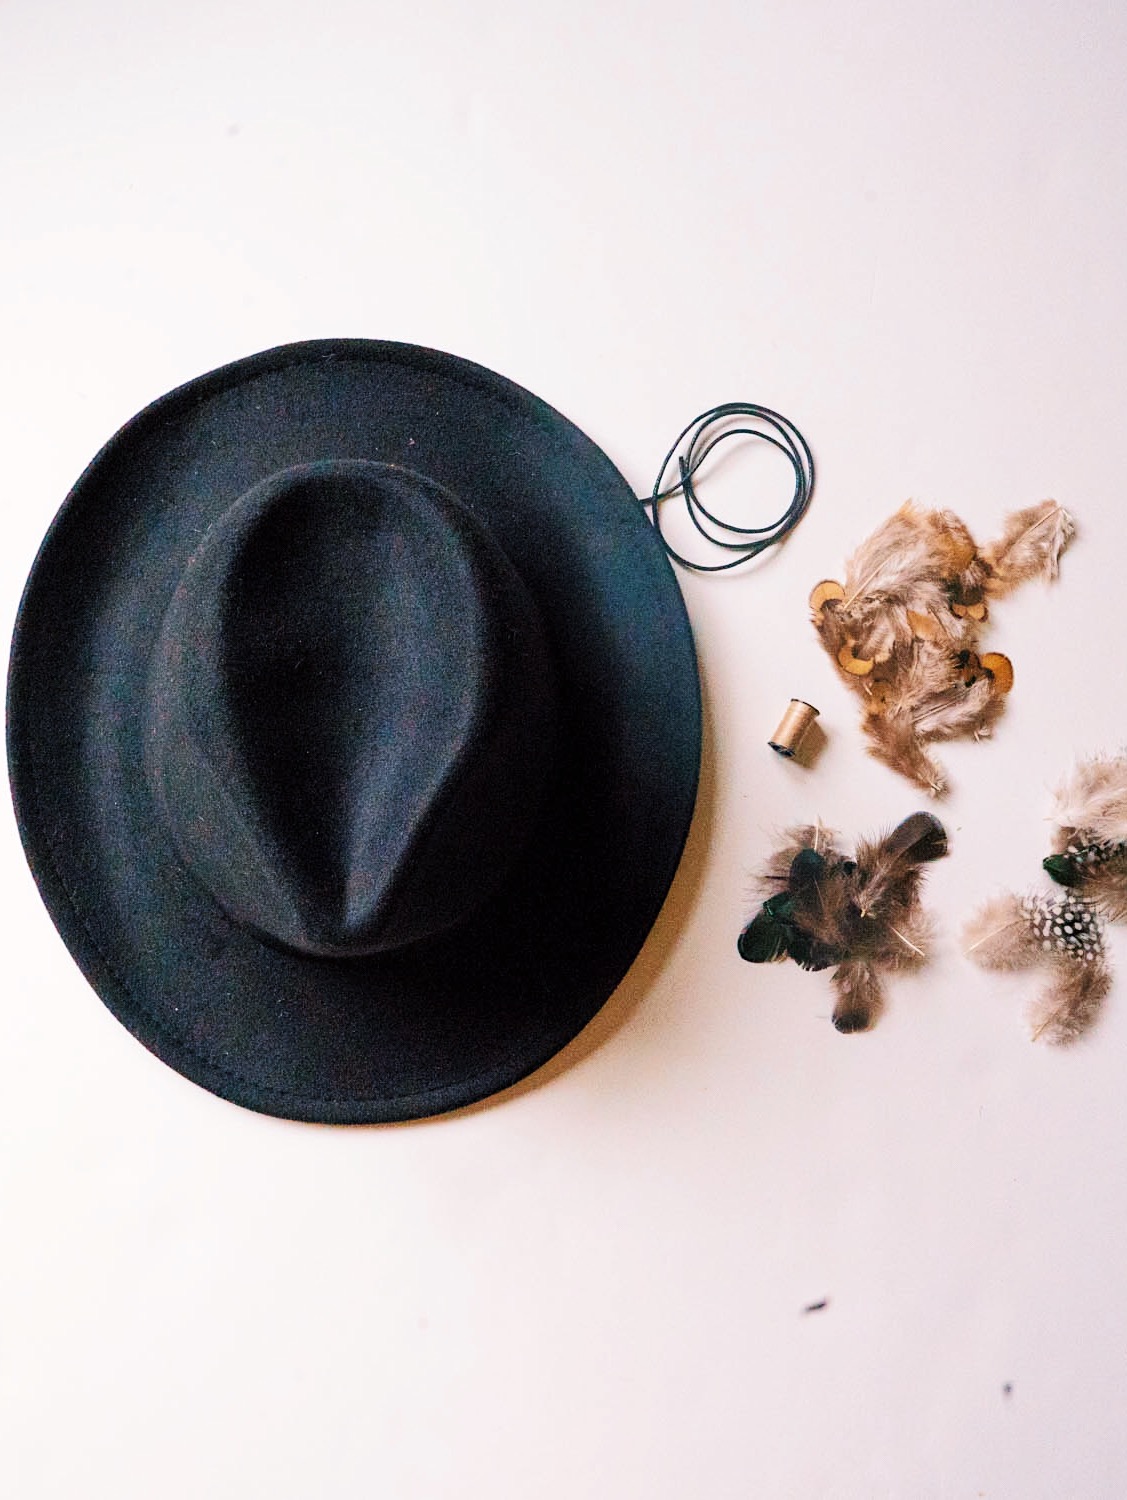 tools to use to create the feather hatband